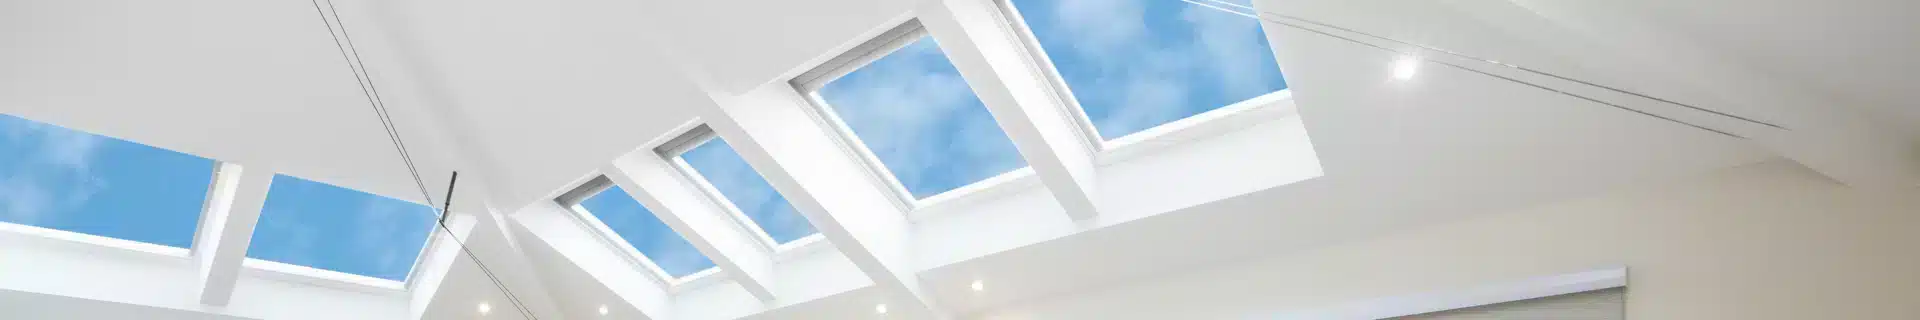 VELUX Skylights in a row with blue sky.